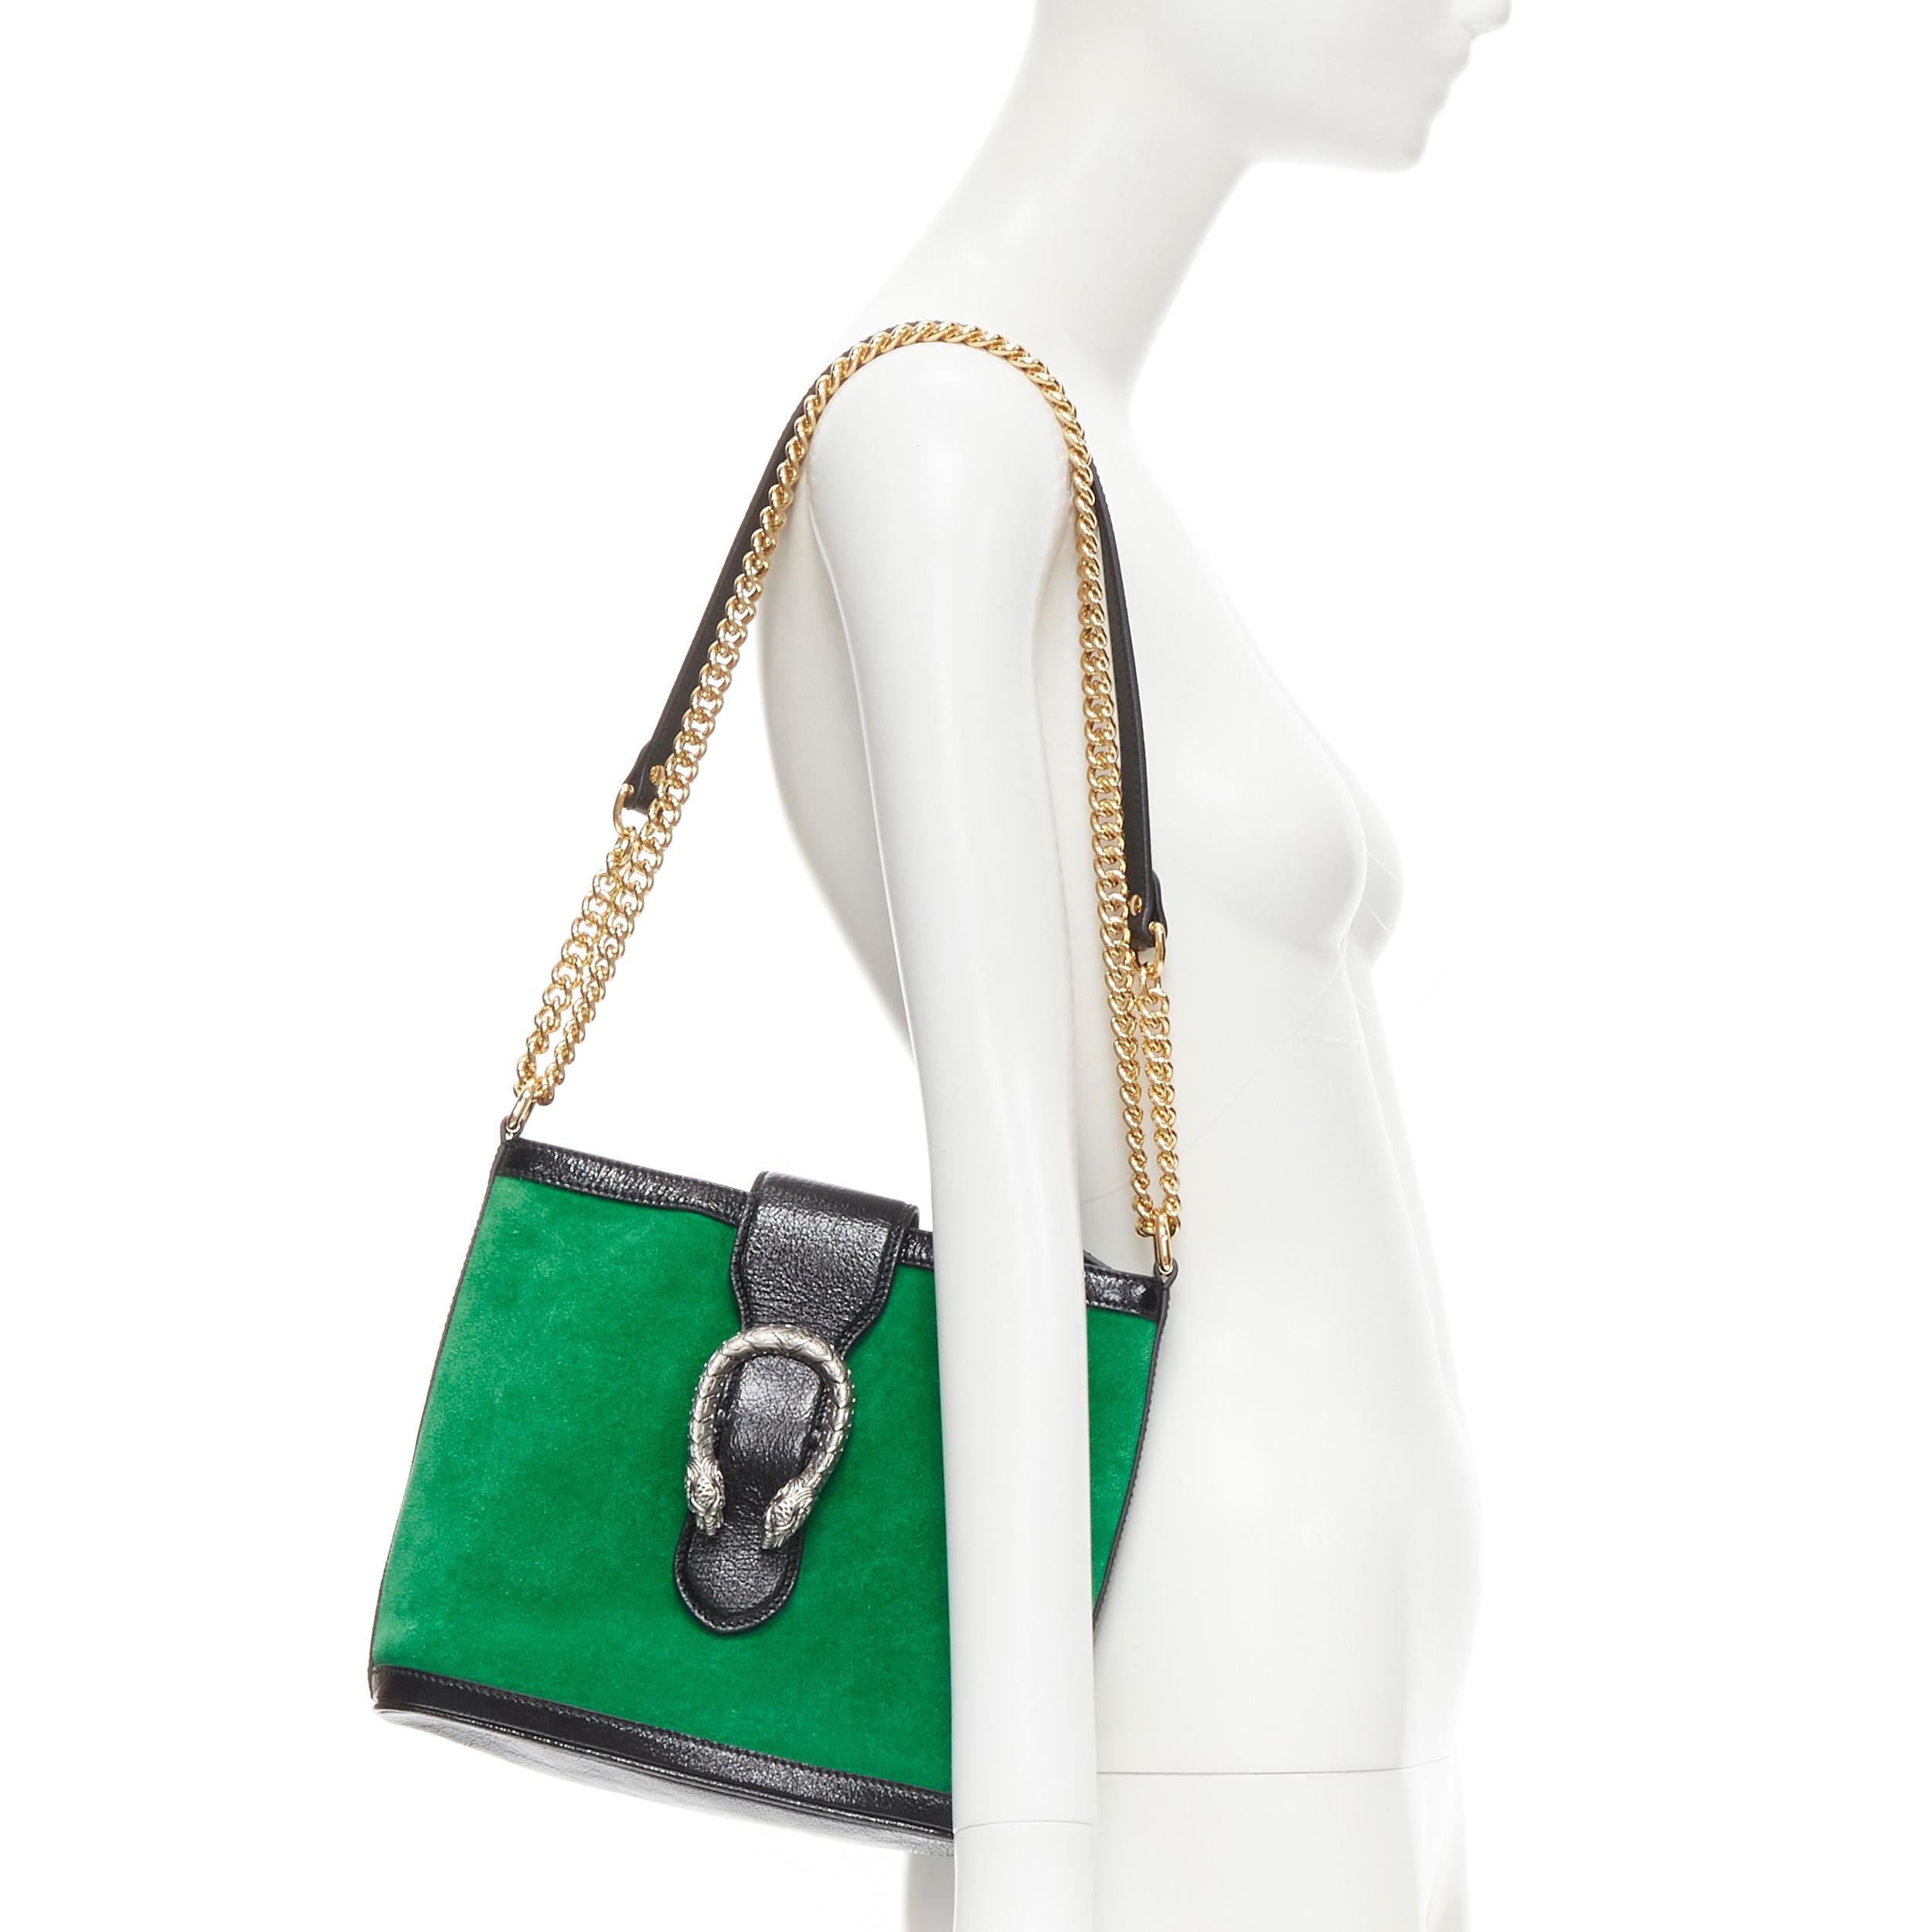 GUCCI Dionysus Kelly green suede black patent trimmed crossbody bucket bag 
Reference: MELK/A00186 
Brand: Gucci 
Designer: Alessandro Michele 
Model: 499622 525040 
Material: Suede 
Color: Green 
Pattern: Solid 
Closure: Magnetic 
Extra Detail: